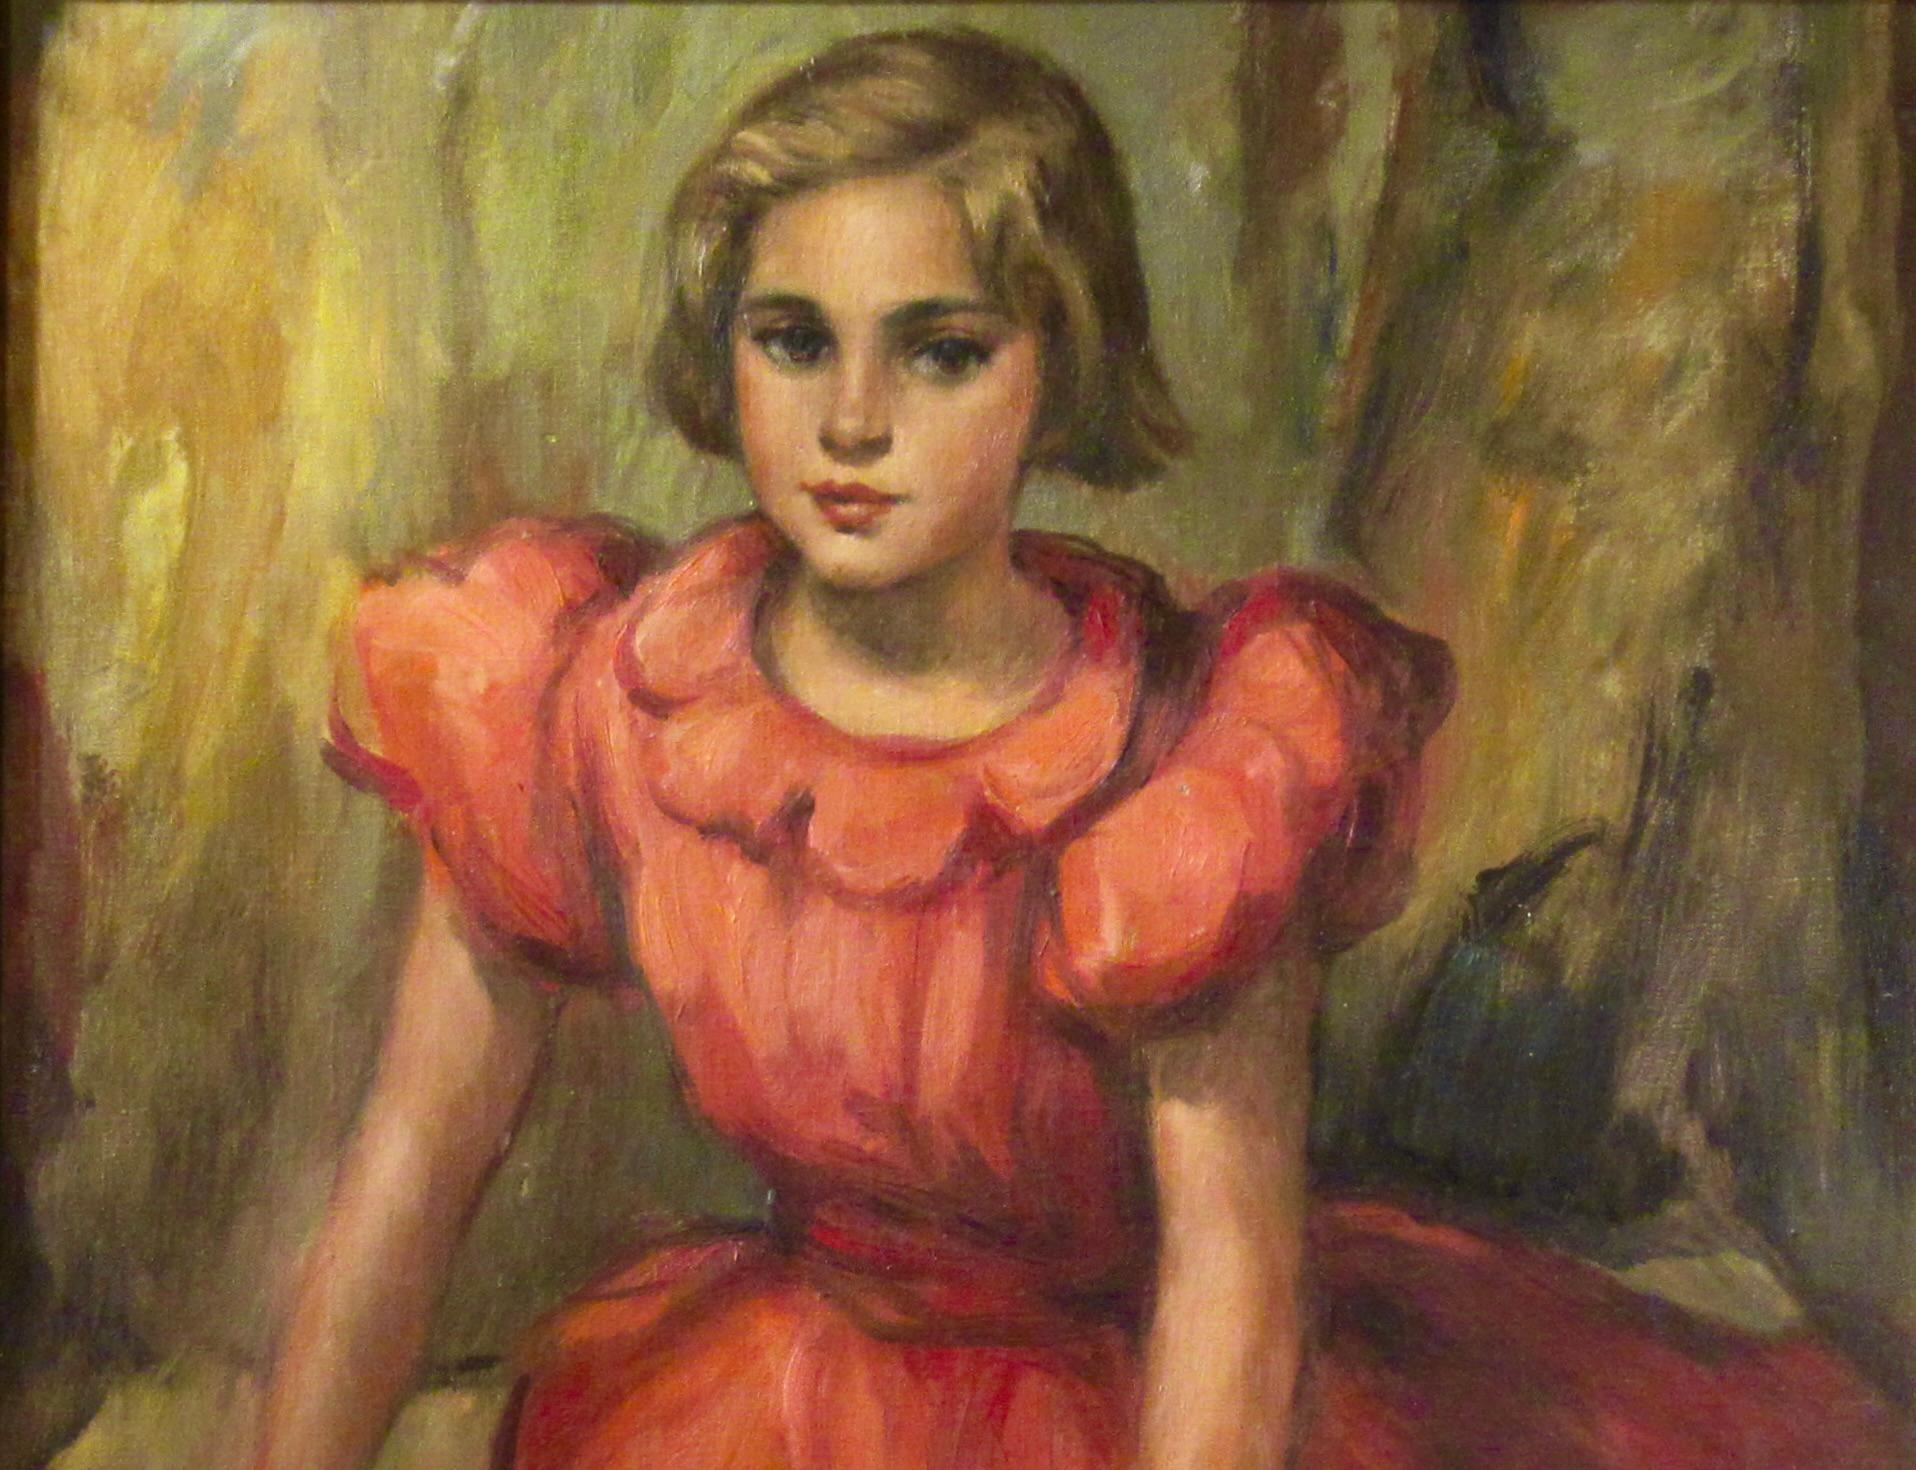 Young Girl Sitting on a Bench - American Impressionist Painting by JONATHAN DAVID BATCHELOR